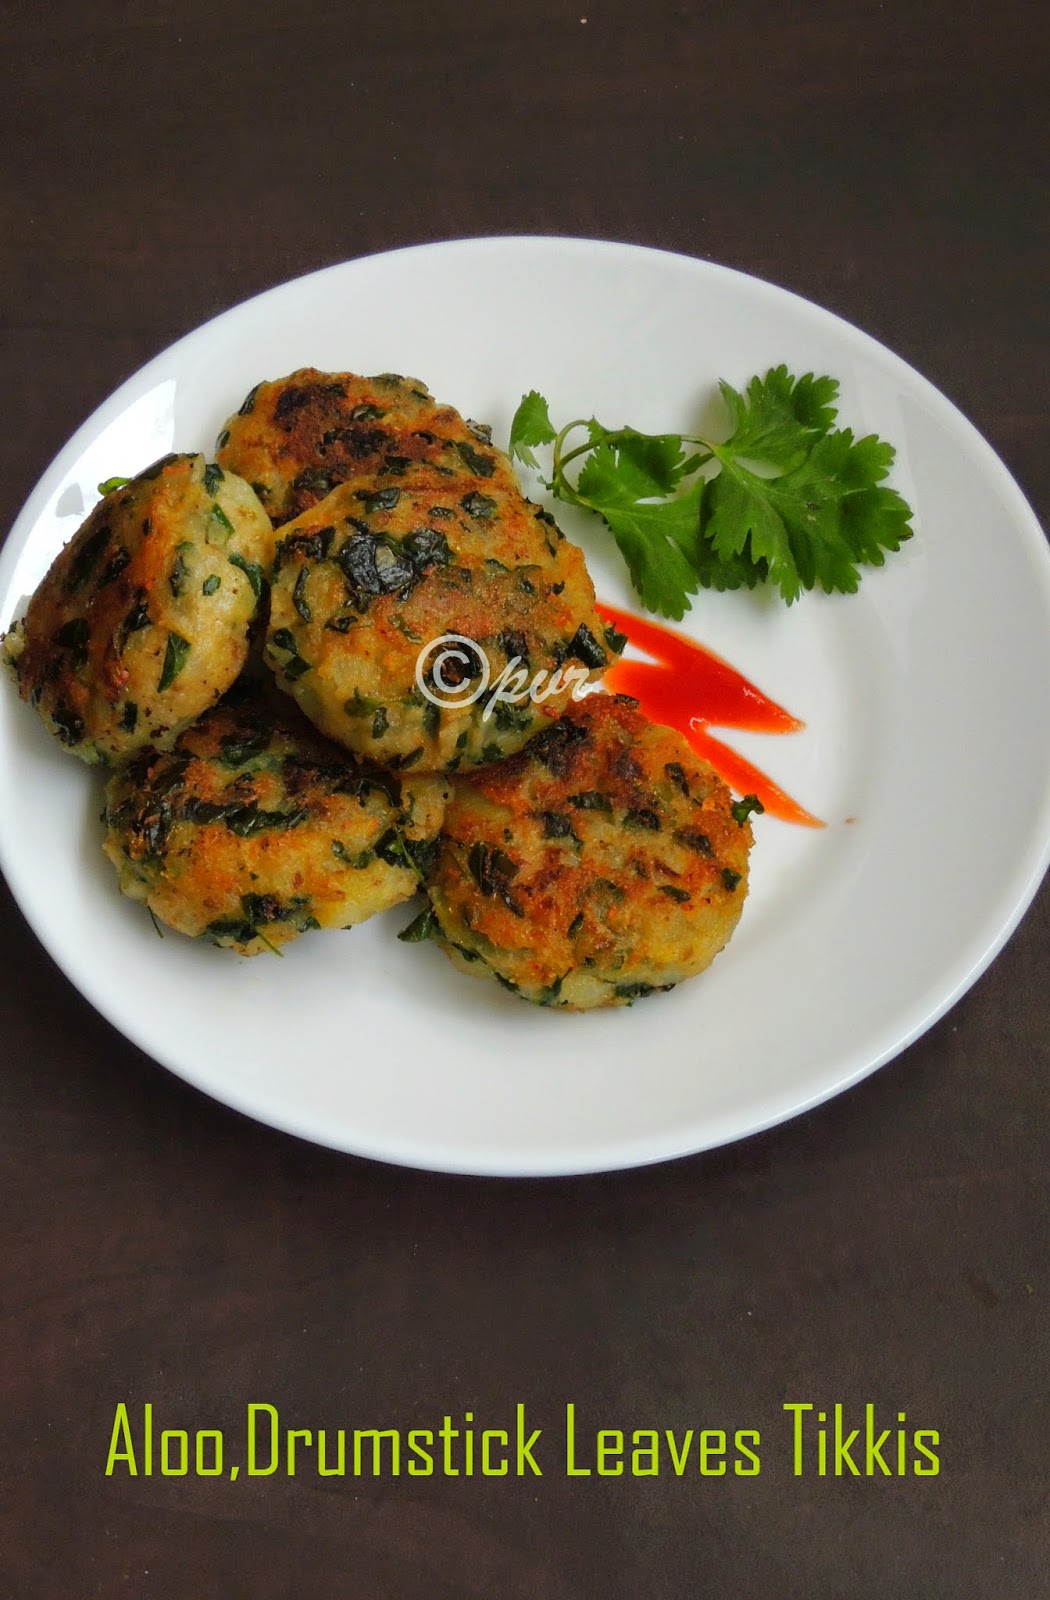 Aloo tikkis with greens, drumstick leaves aloo cutlets